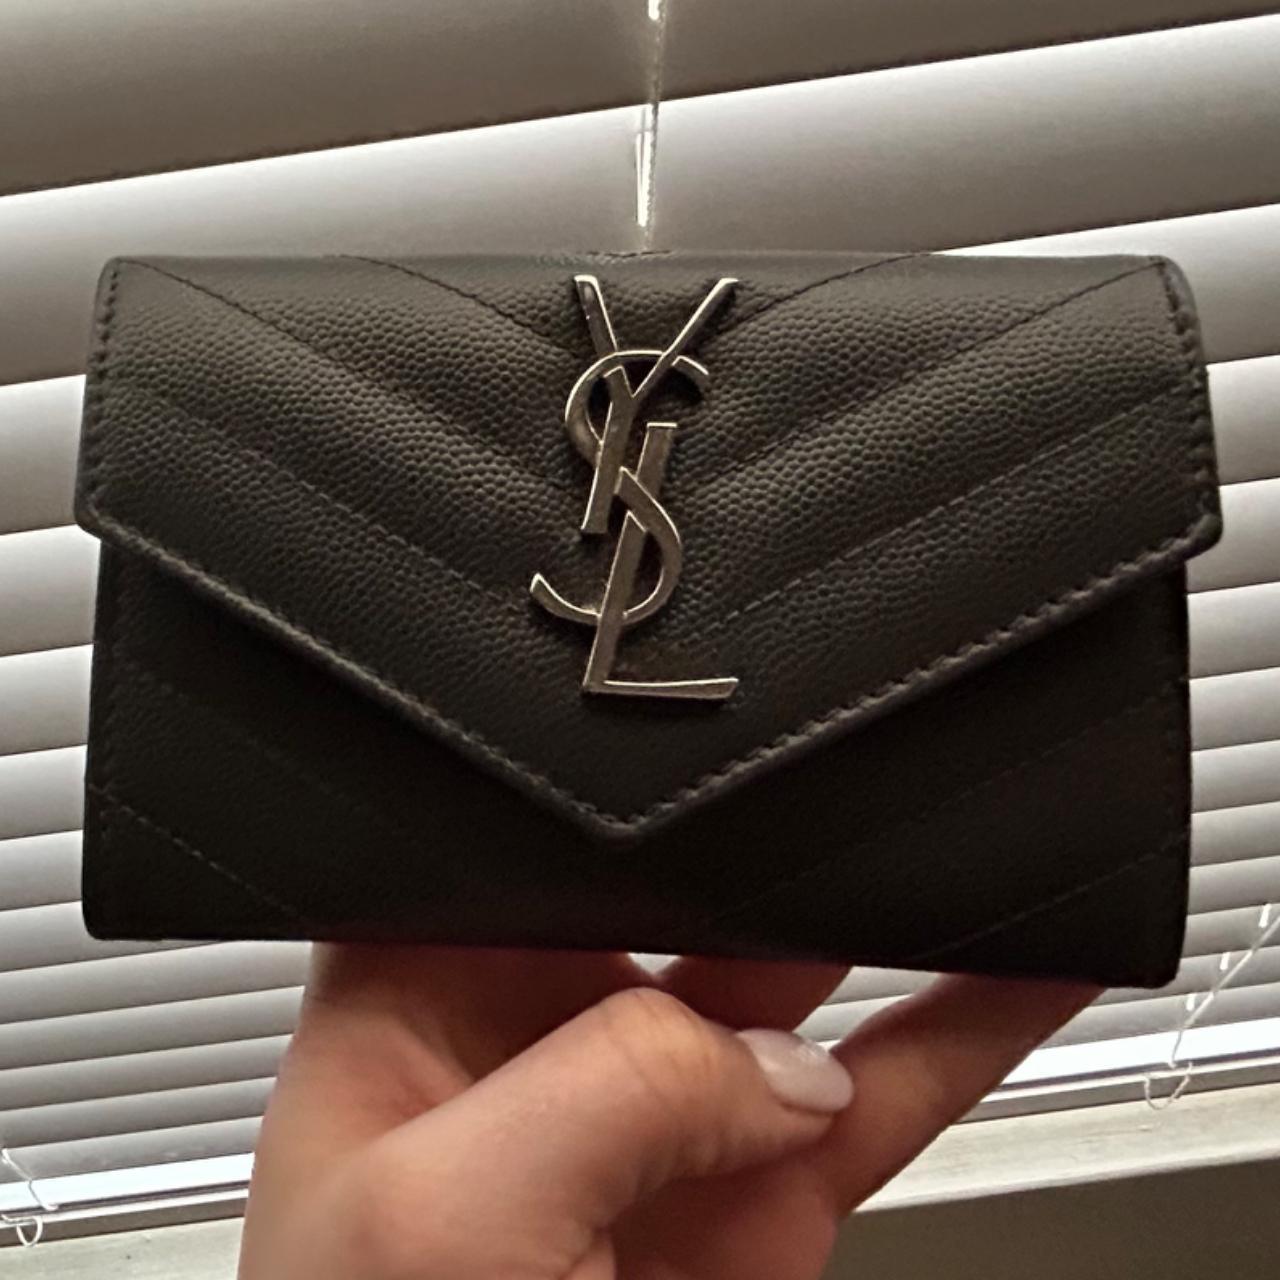 YSL beauty makeup bag in excellent condition and - Depop